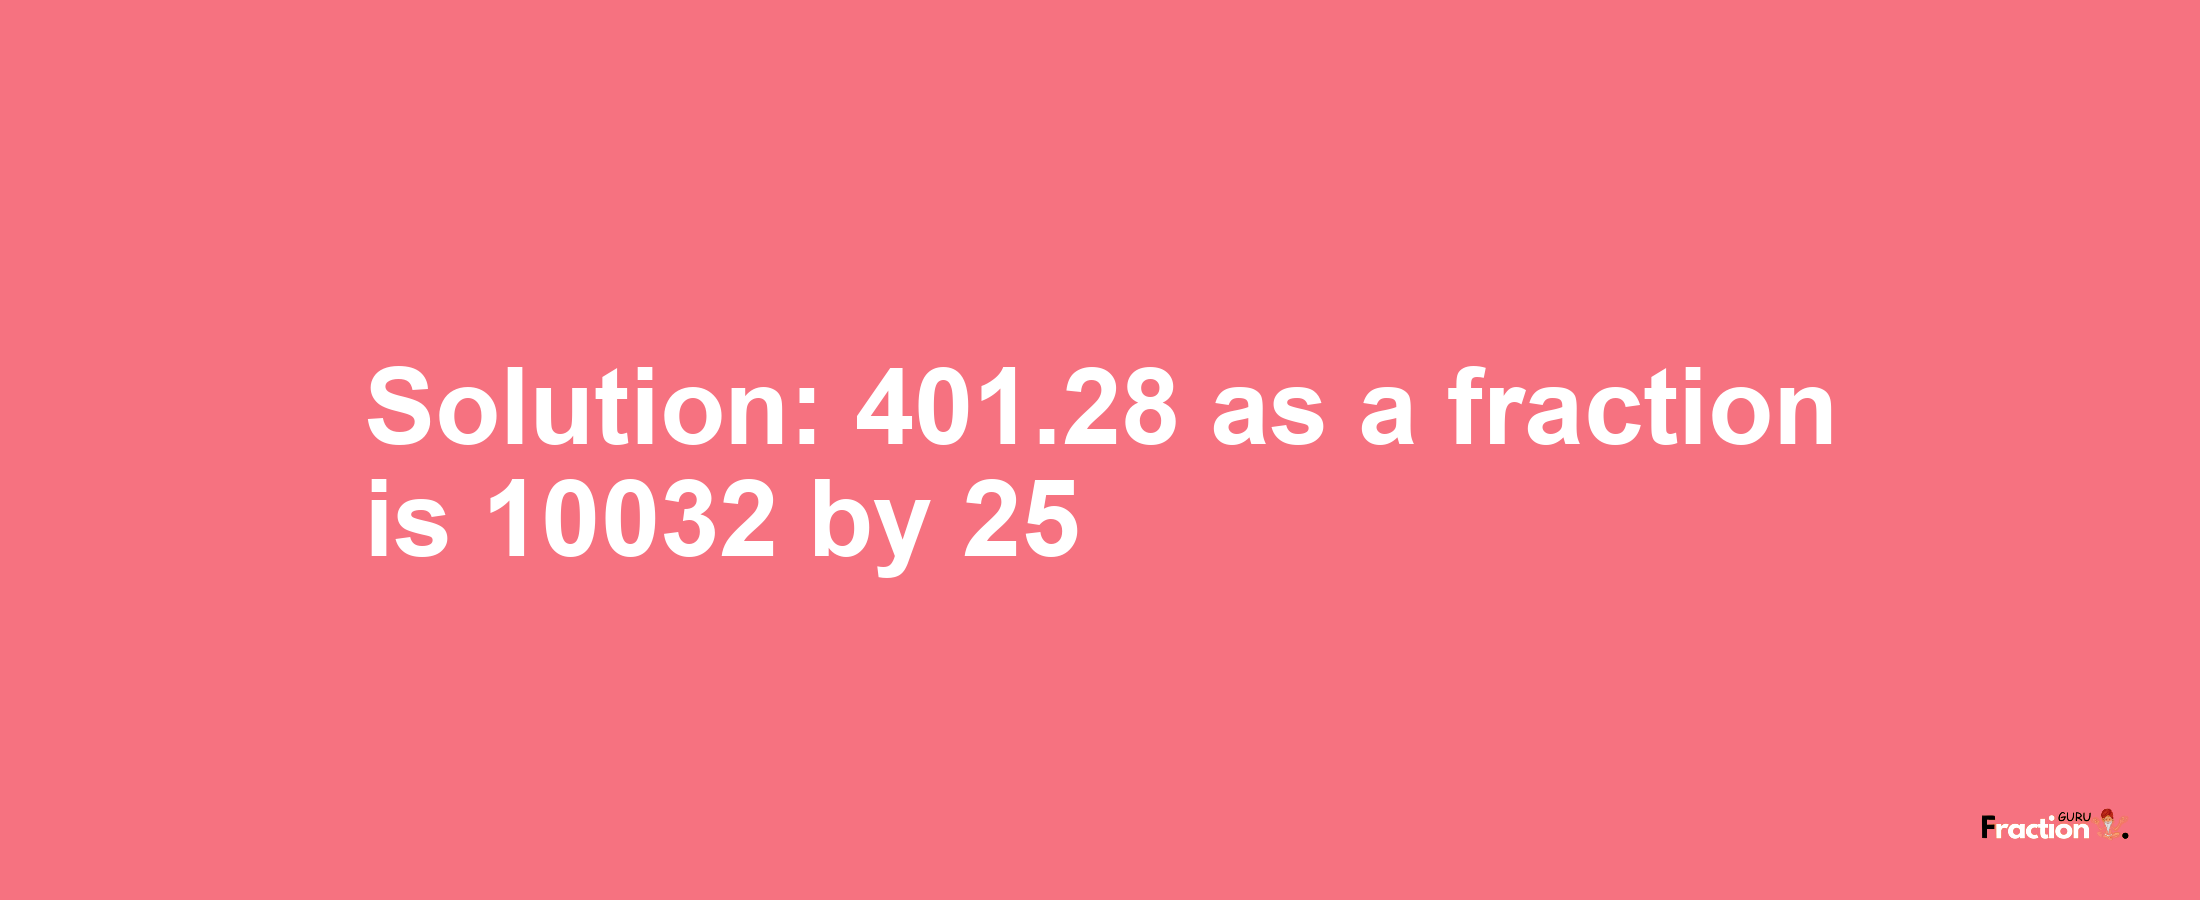 Solution:401.28 as a fraction is 10032/25